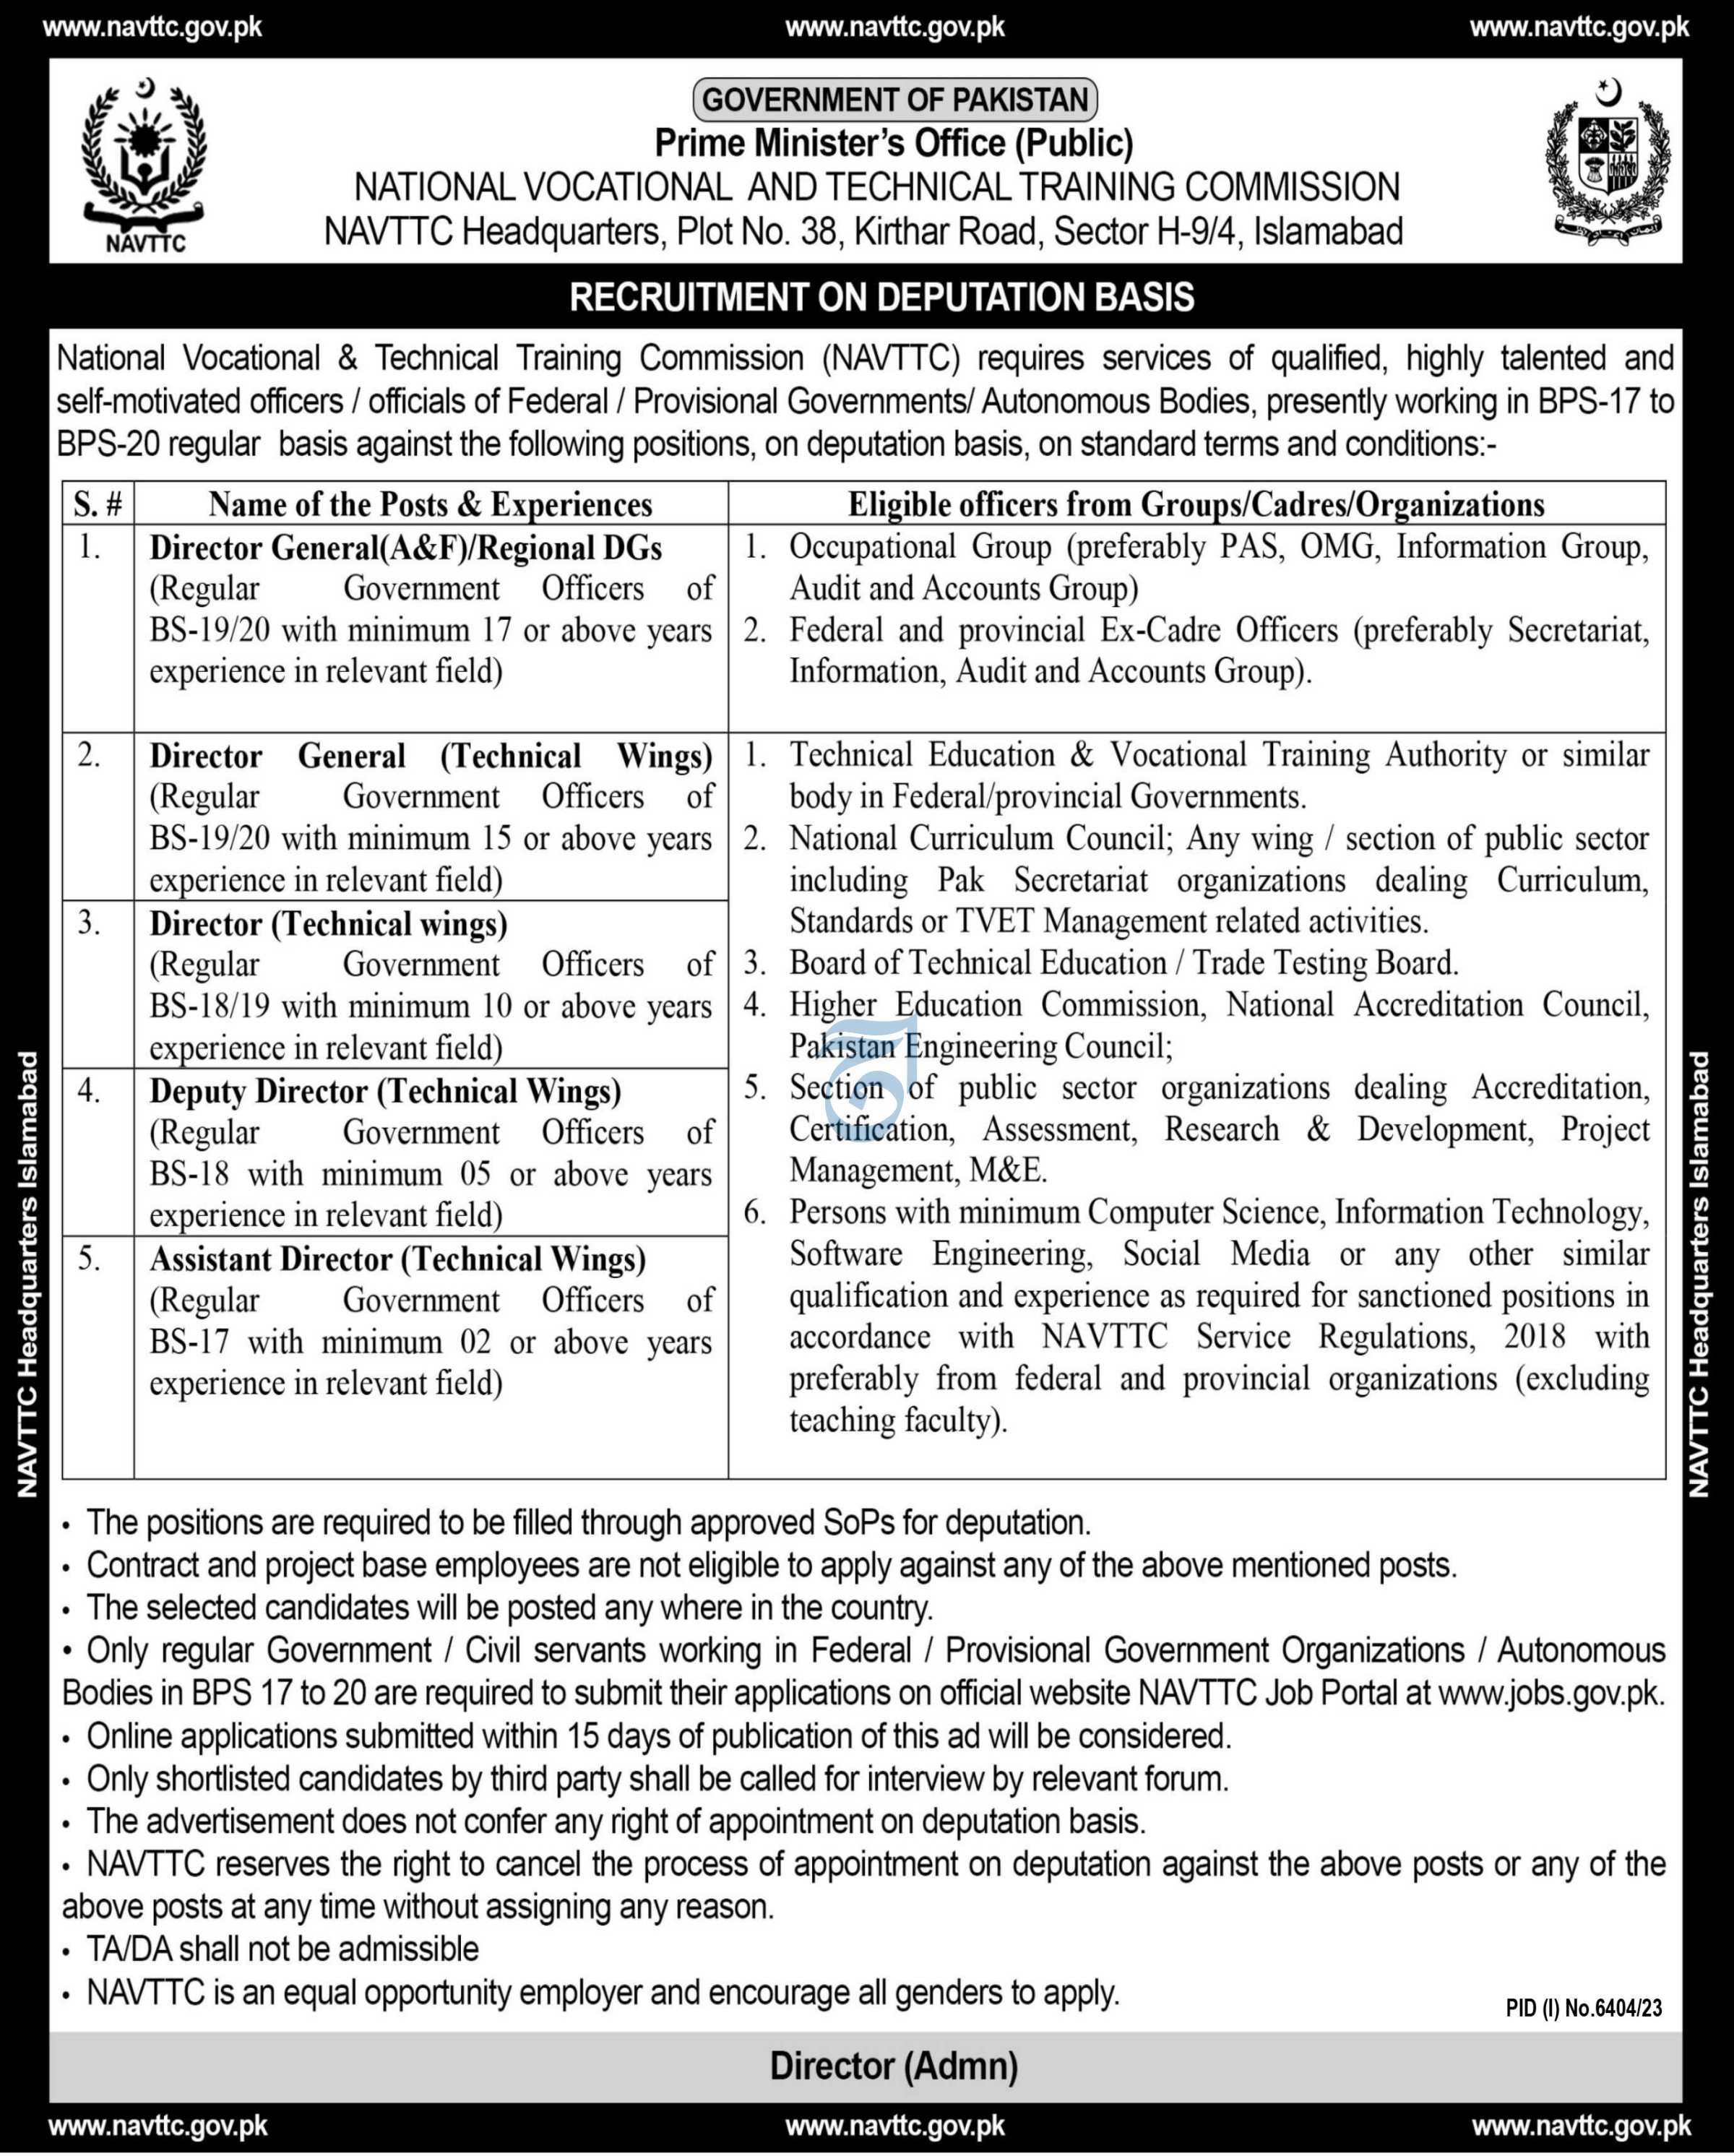 Jobs in National Vocational & Technical Training Commission NAVTTC